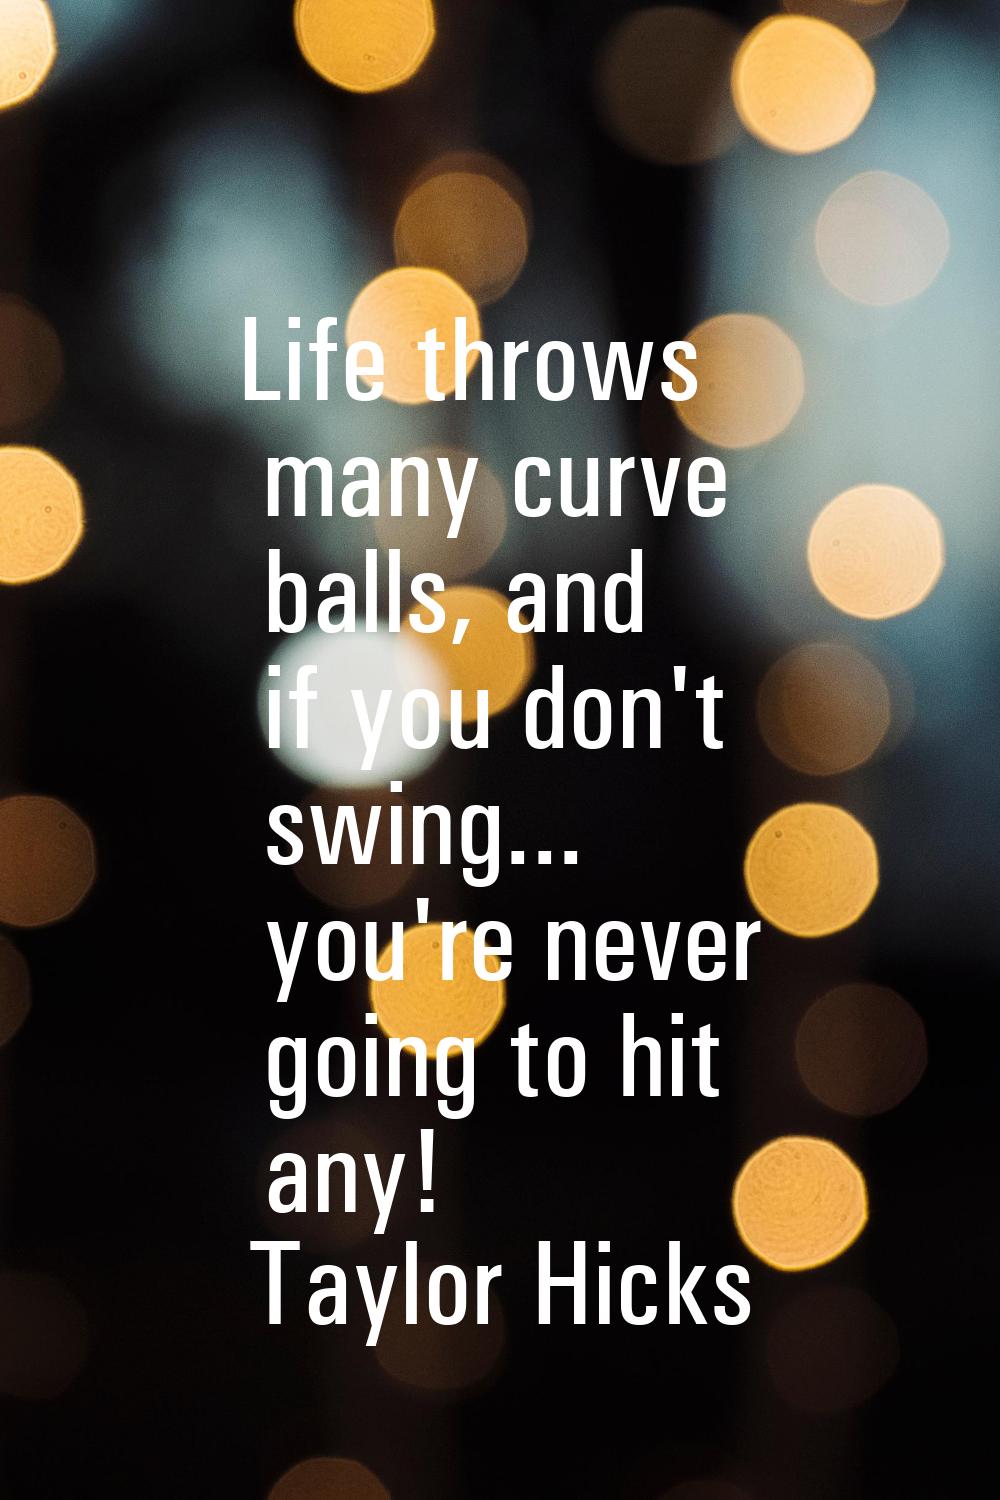 Life throws many curve balls, and if you don't swing... you're never going to hit any!